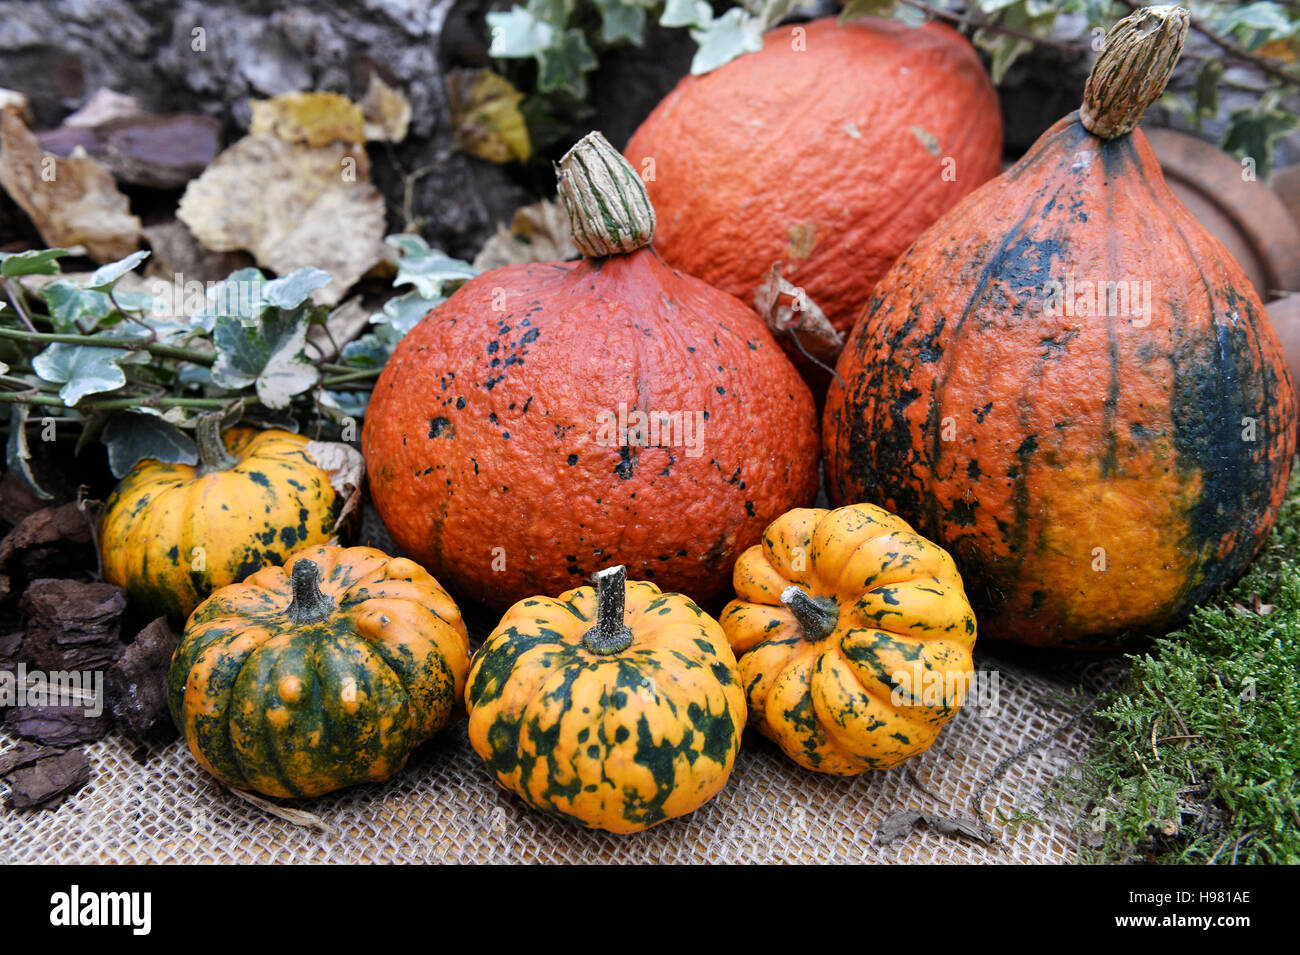 Set of marrows and pumkins in a garden in Colmar, France Stock Photo